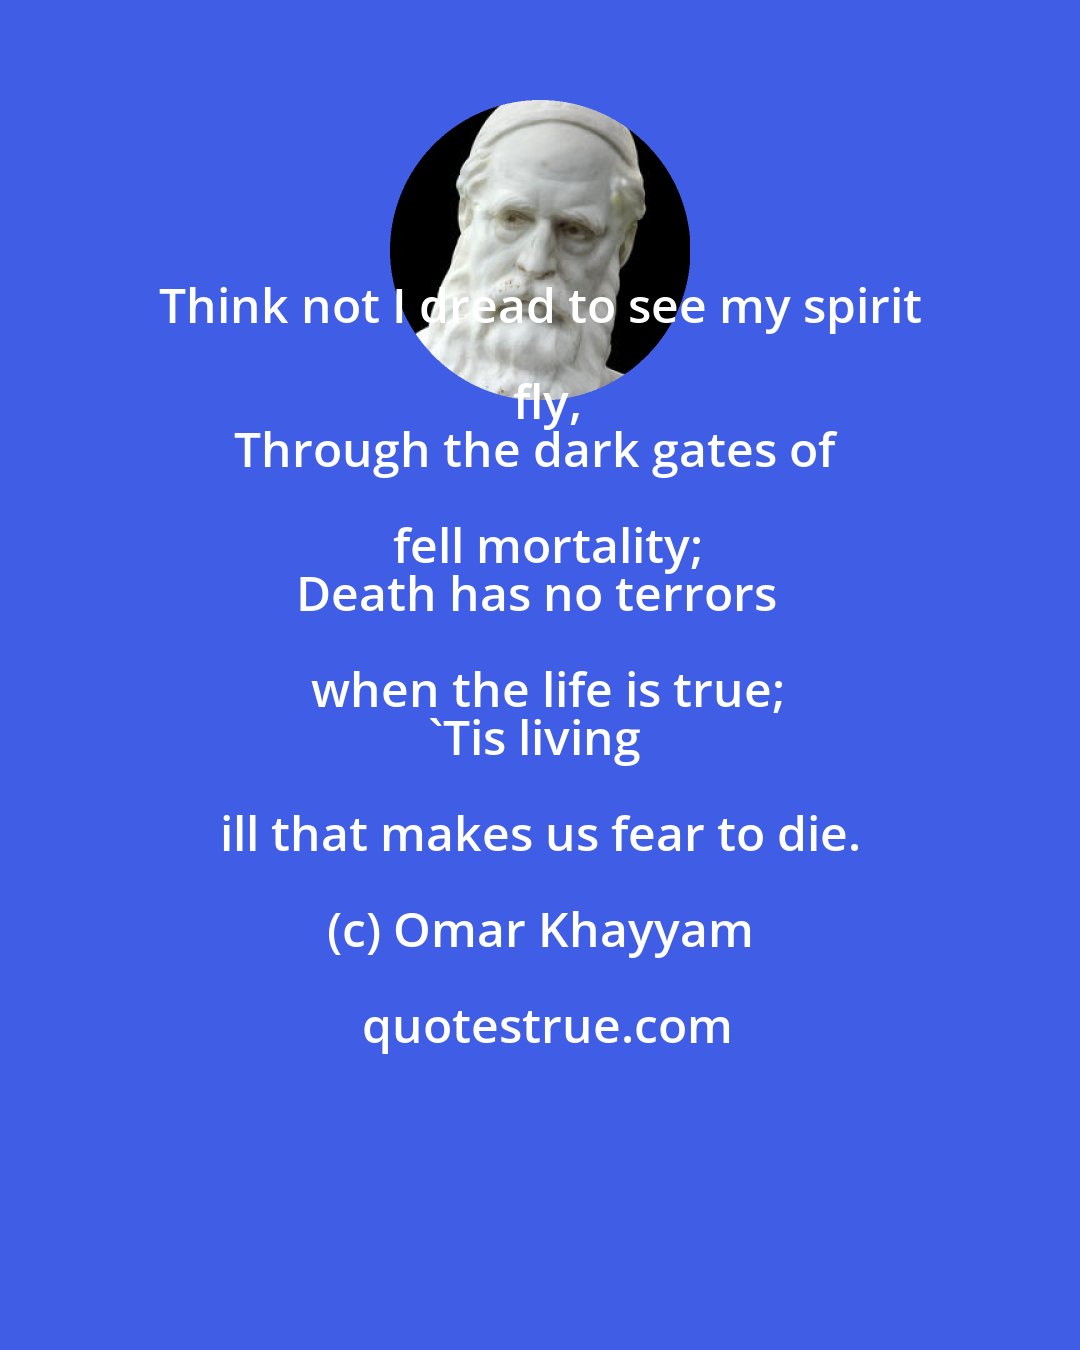 Omar Khayyam: Think not I dread to see my spirit fly,
Through the dark gates of fell mortality;
Death has no terrors when the life is true;
'Tis living ill that makes us fear to die.